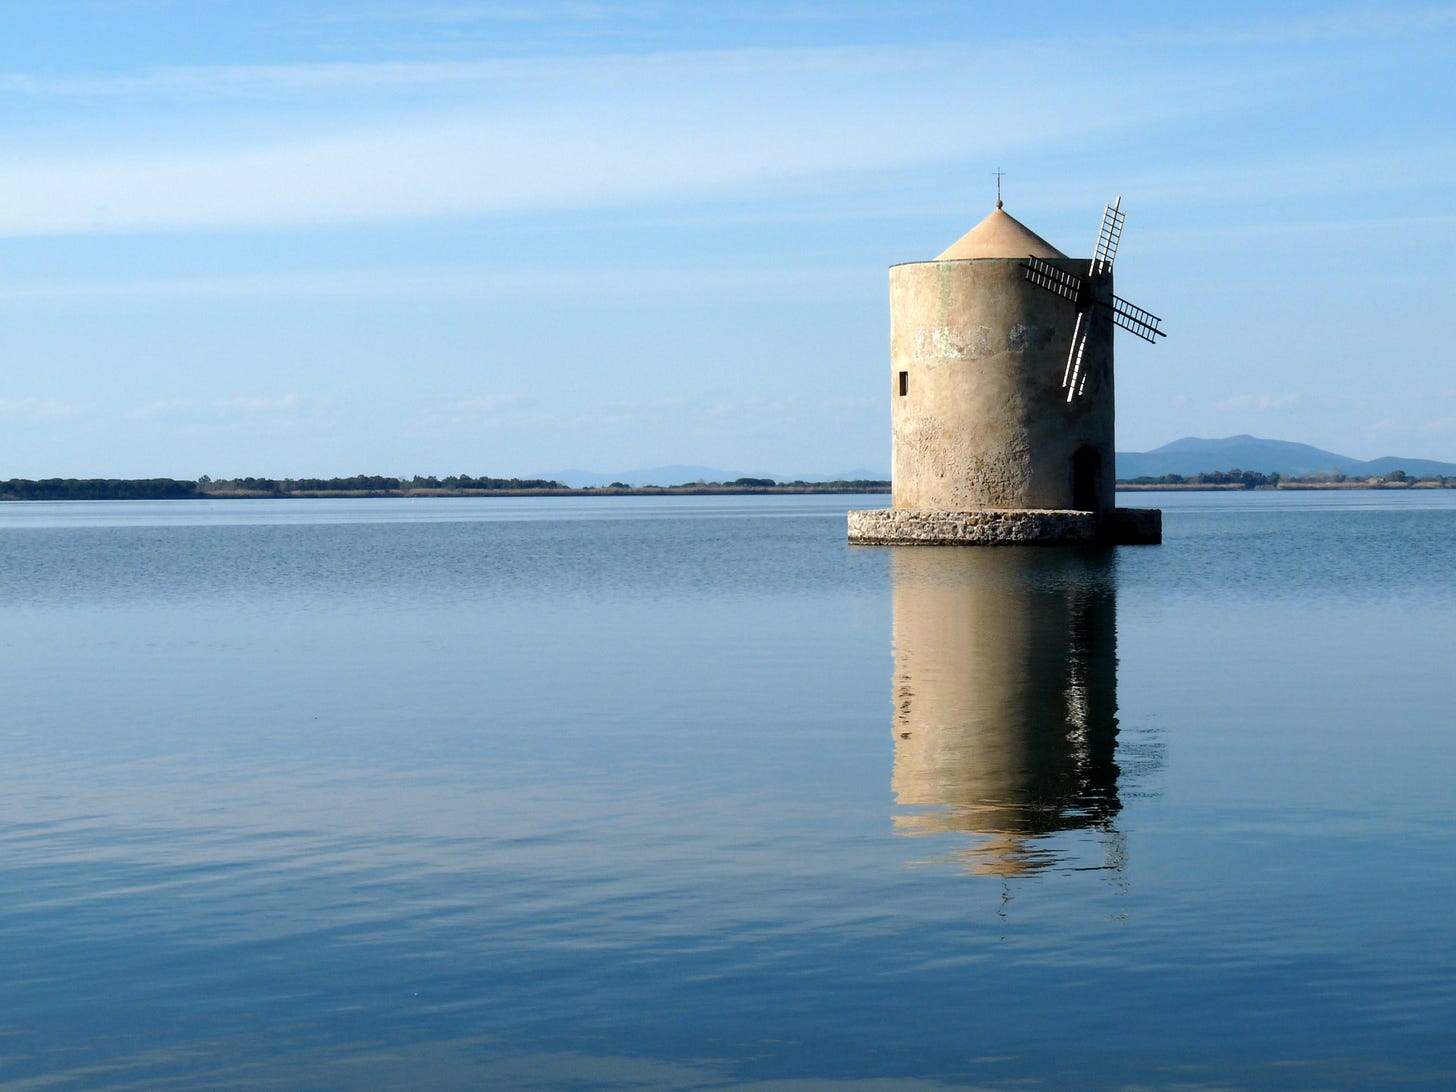 An ancient windmill set in the middle of a lagoon